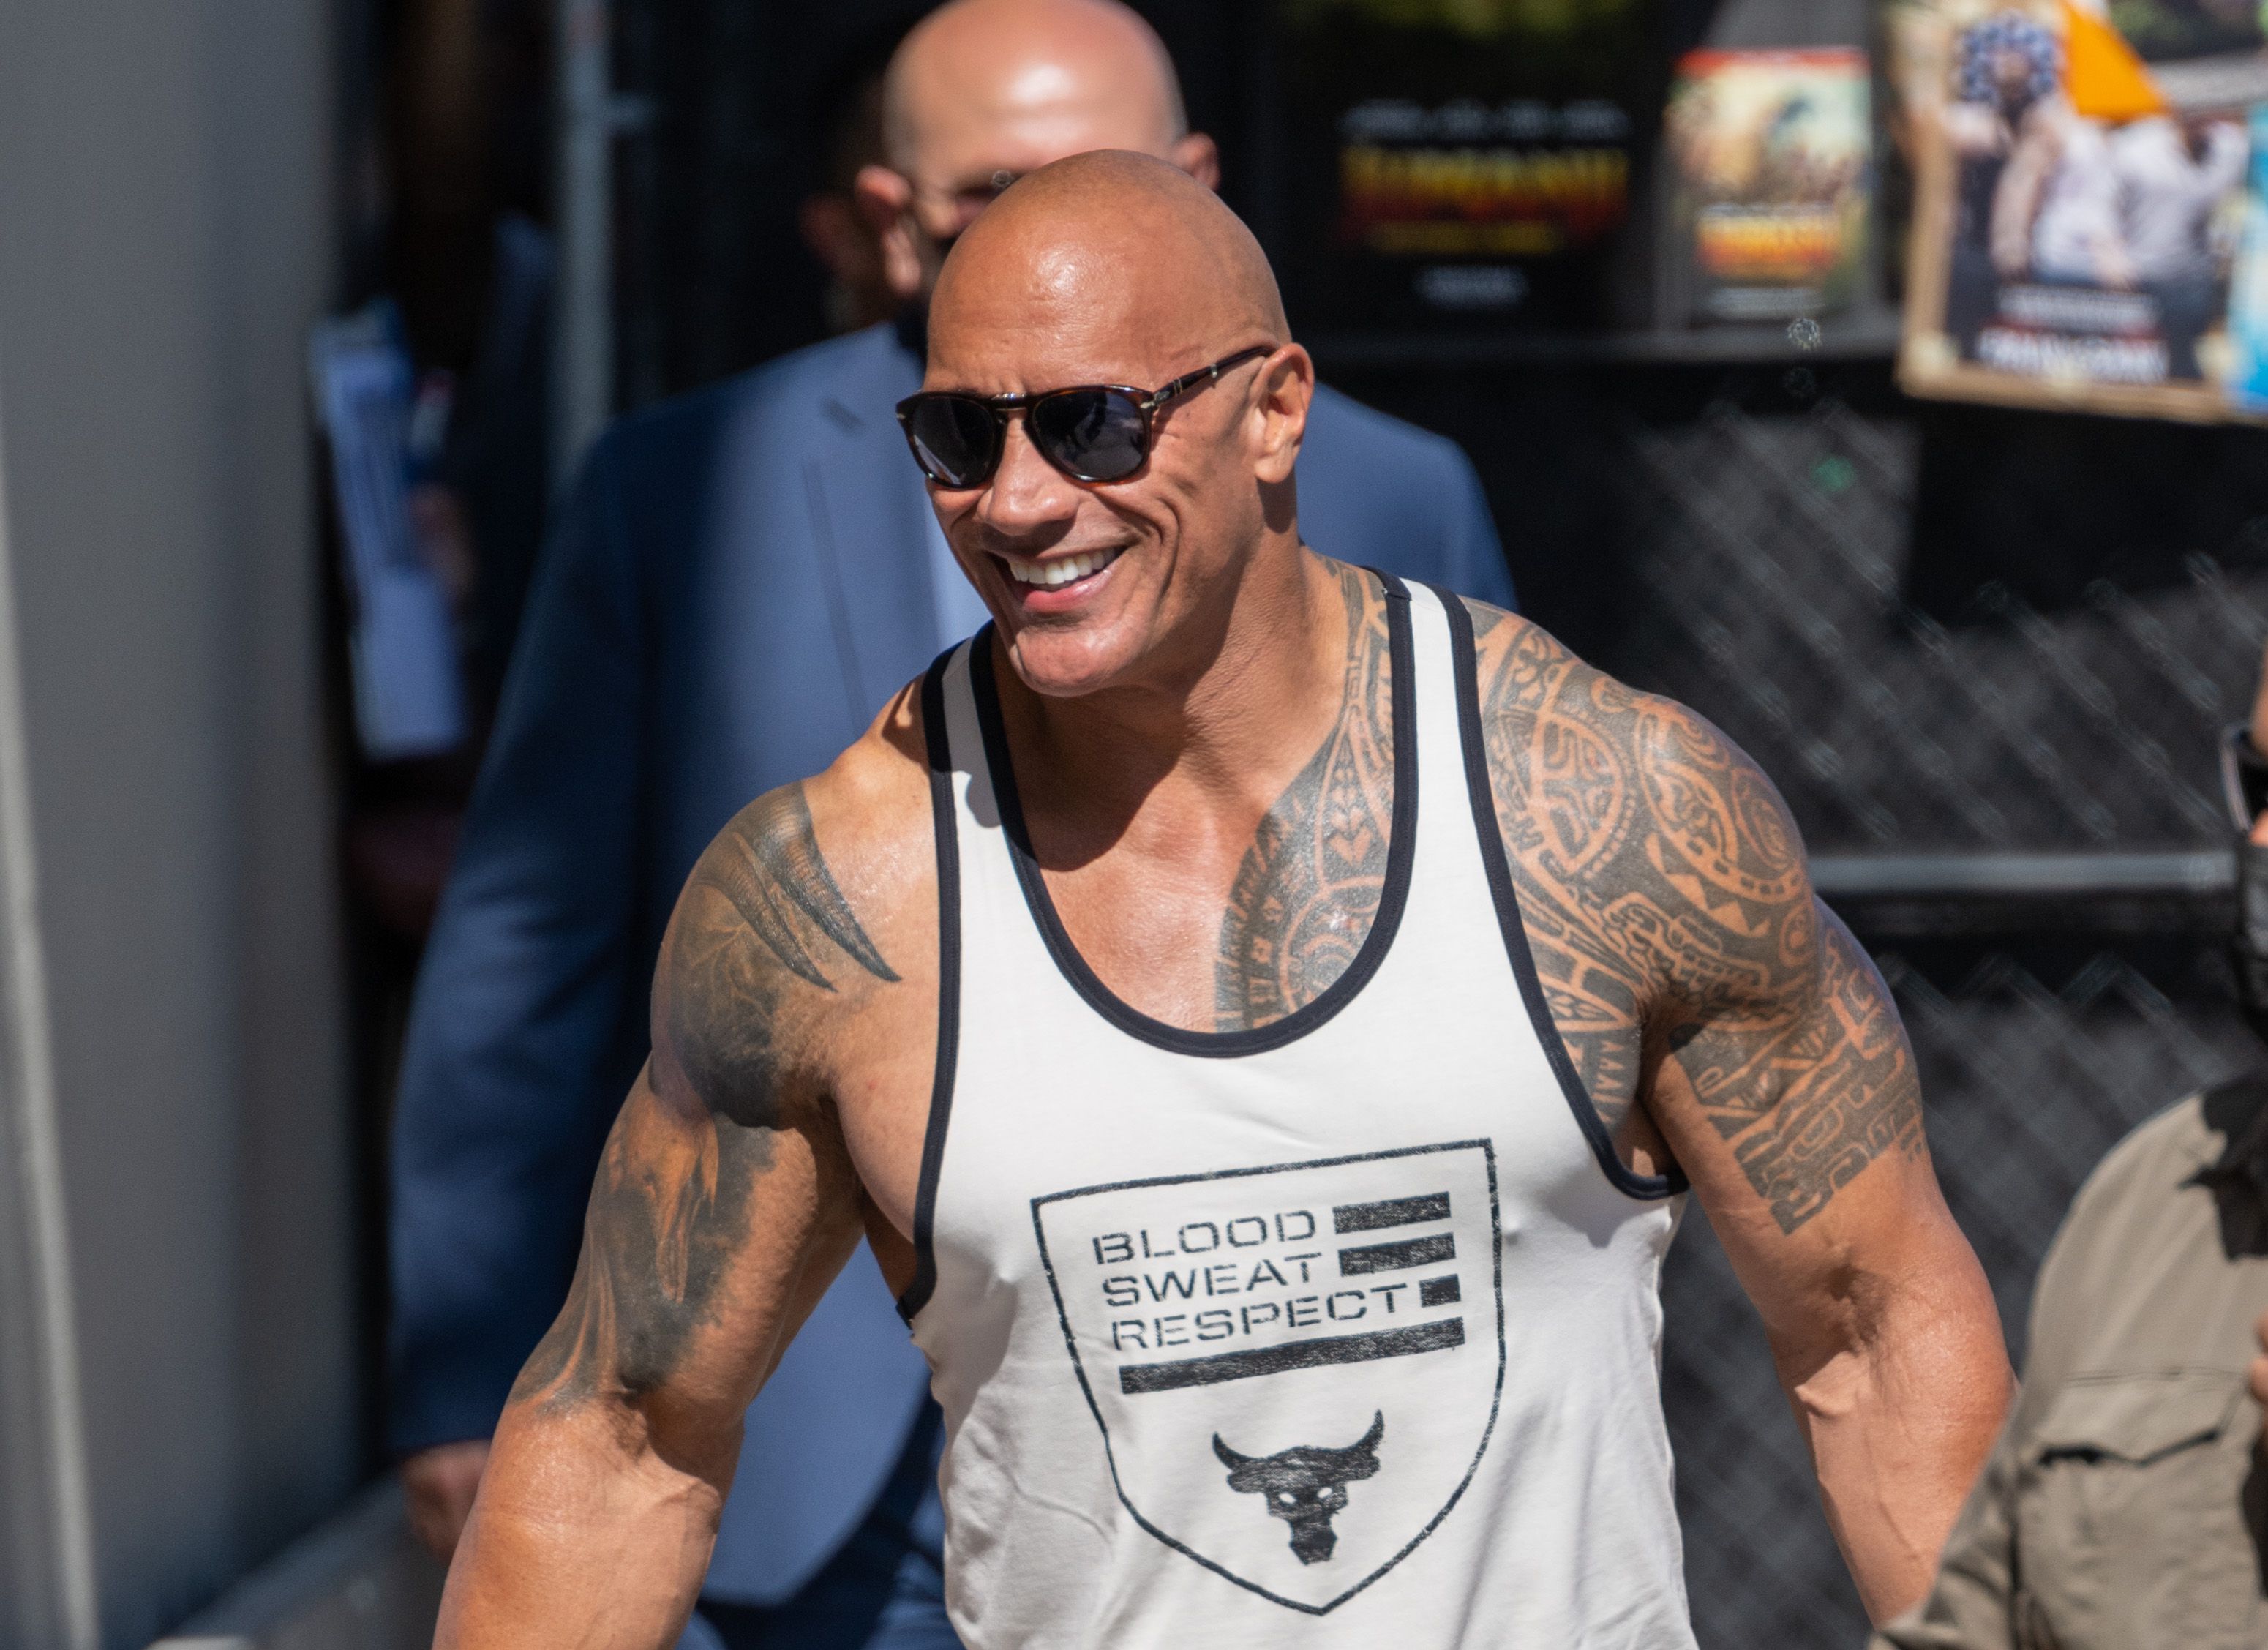 The Rock Uses These Words to Motivate Himself in His Workouts